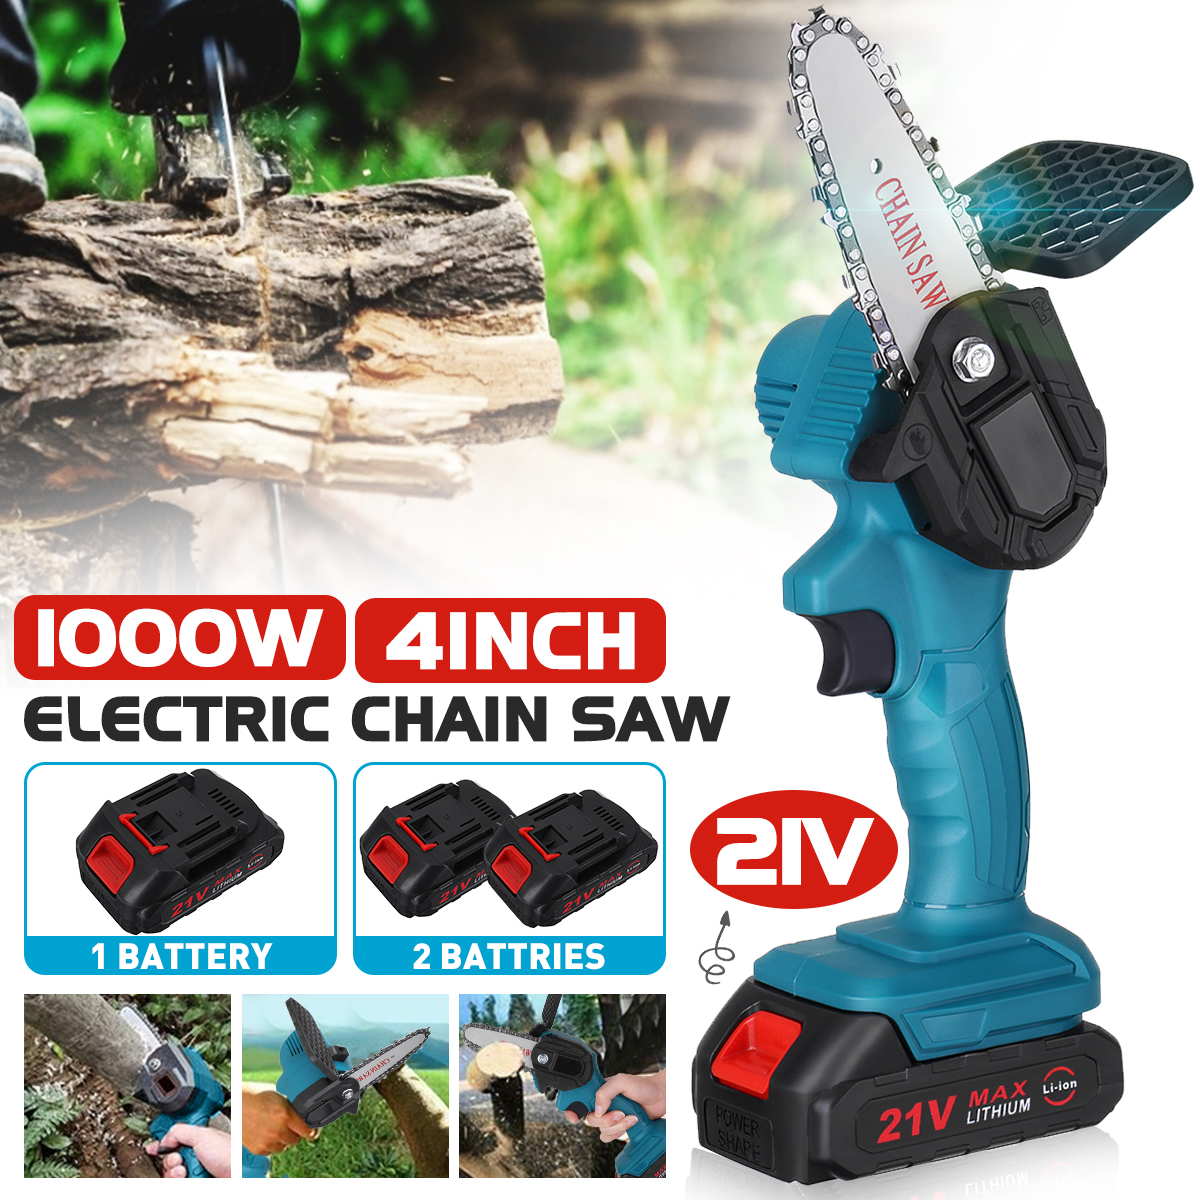 4-Inch-21V-Cordless-Electric-Chain-Saw-W-01pc2pcs-Batteries-For-Tree-Branch-Wood-Cutting-Tool-1804698-1